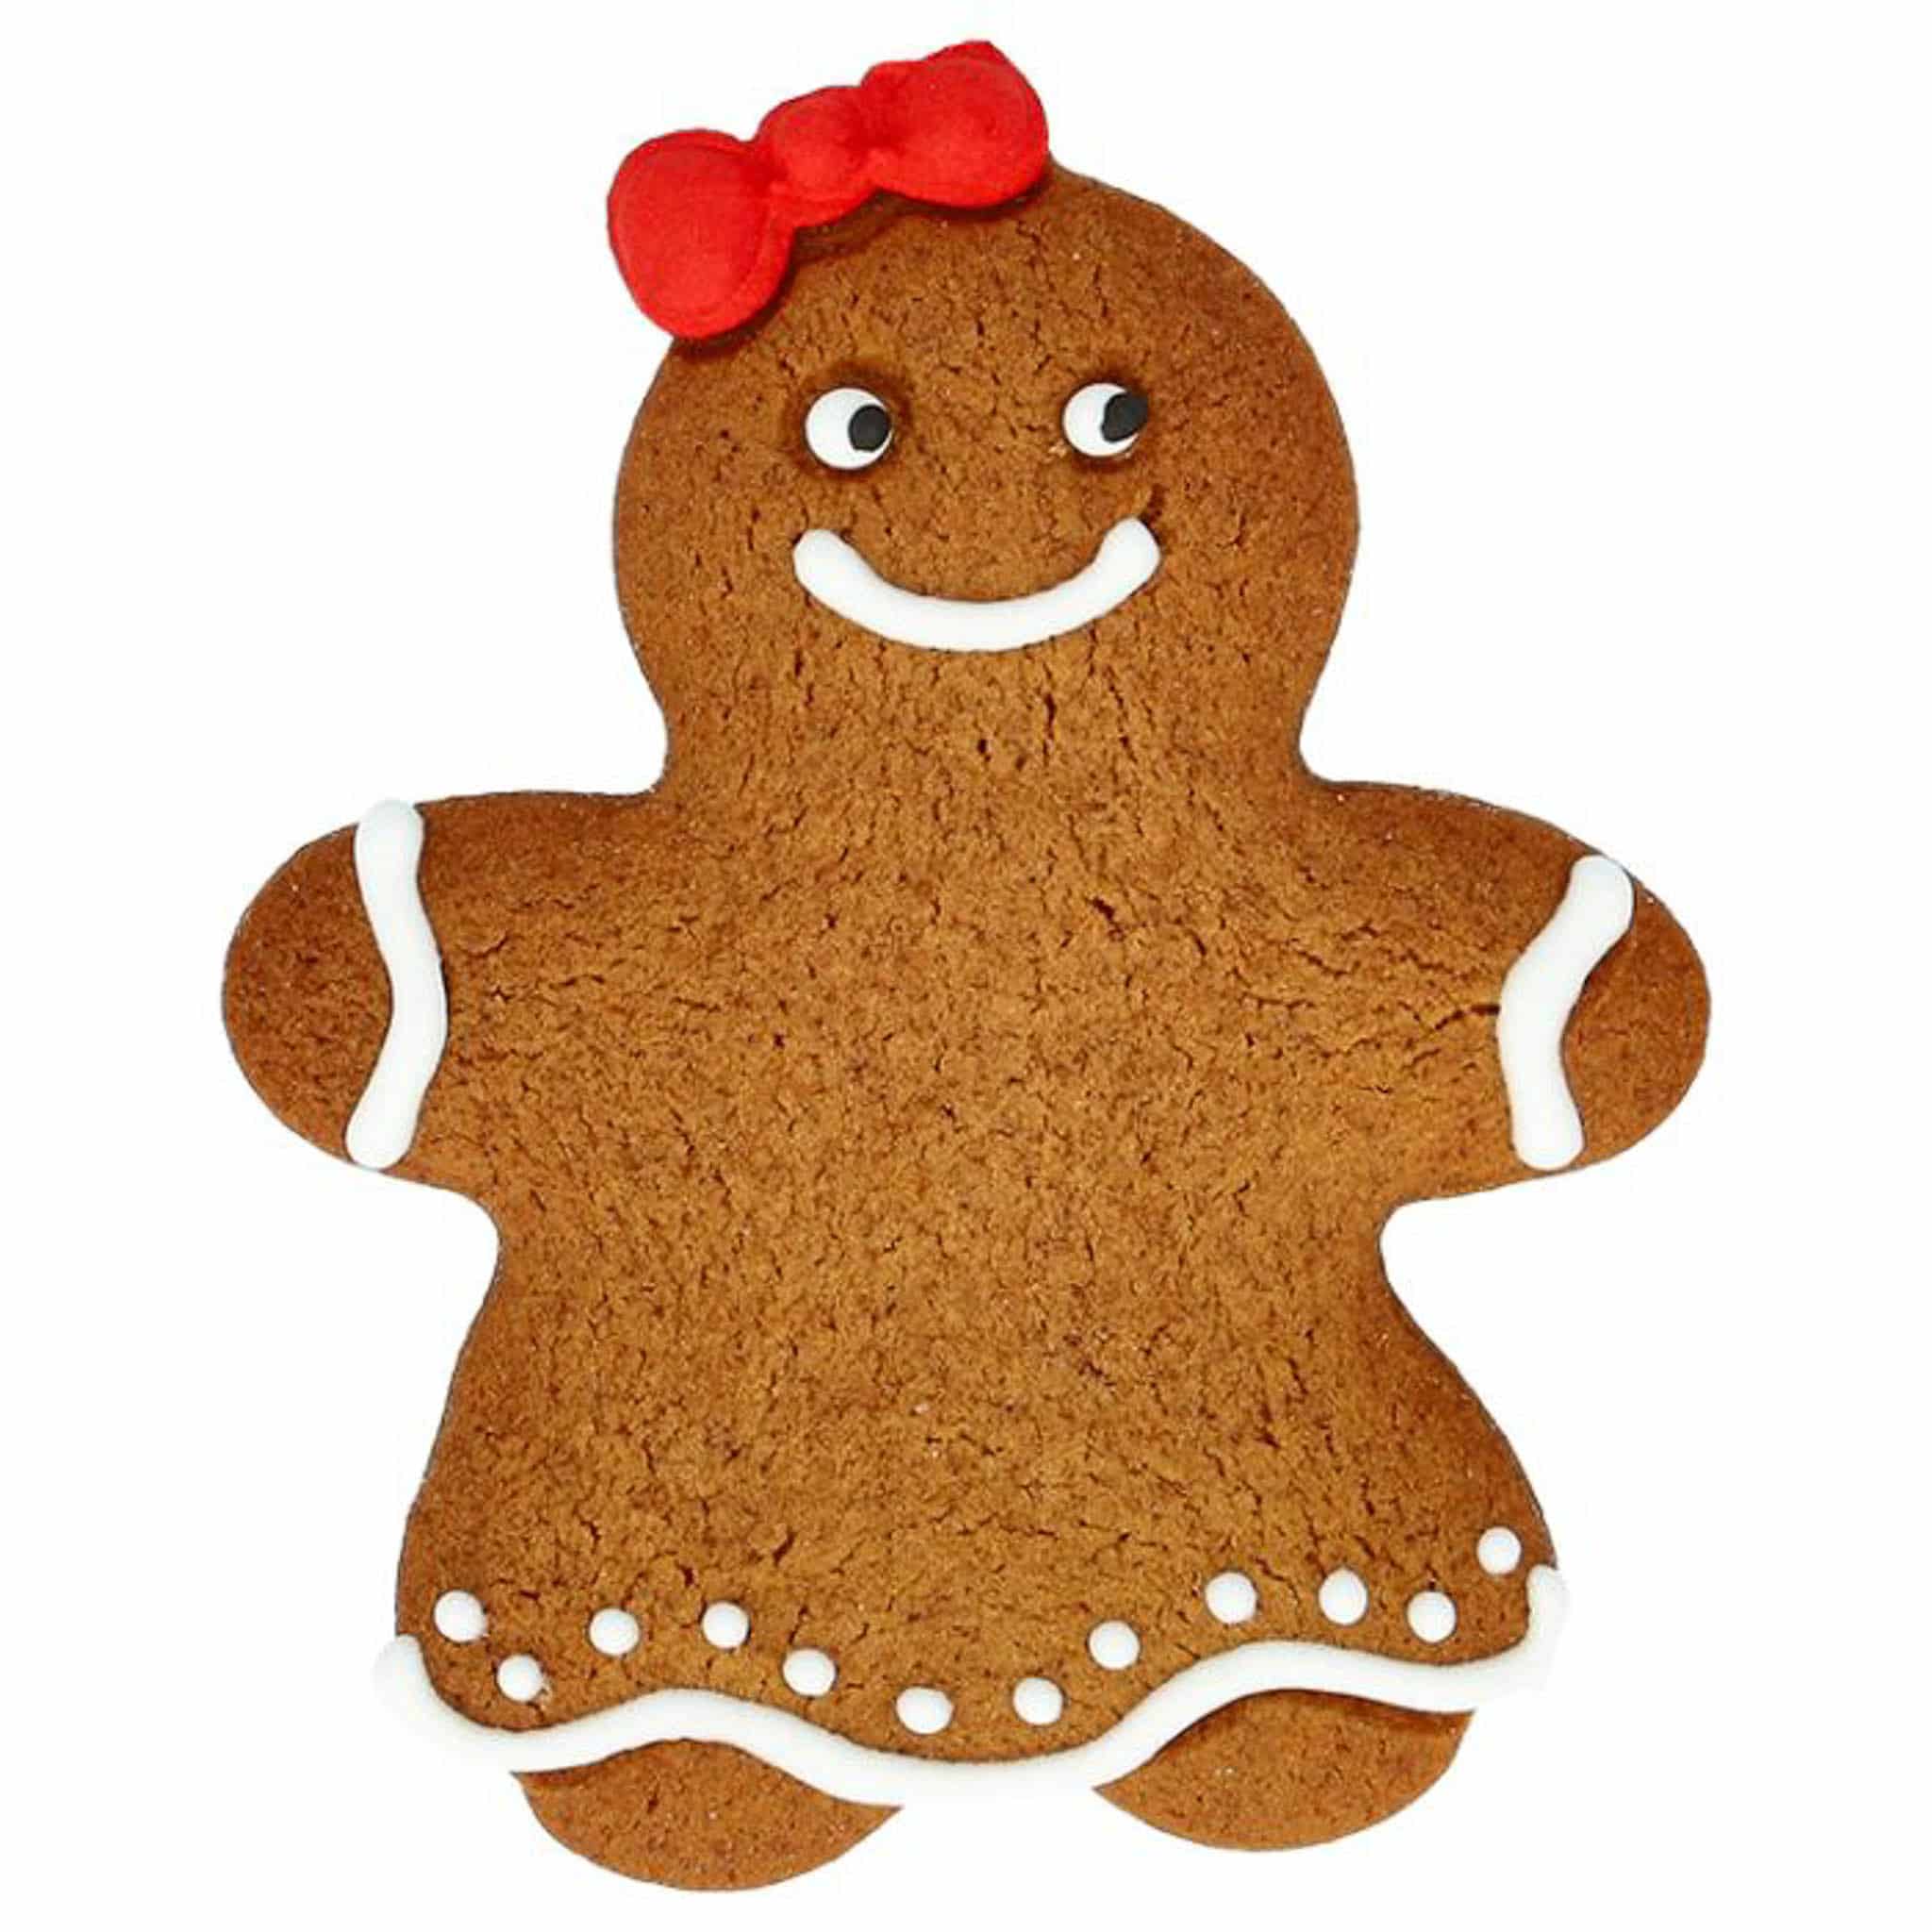 Stainless Steel Gingerbread Woman Cookie Cutter, 8cm